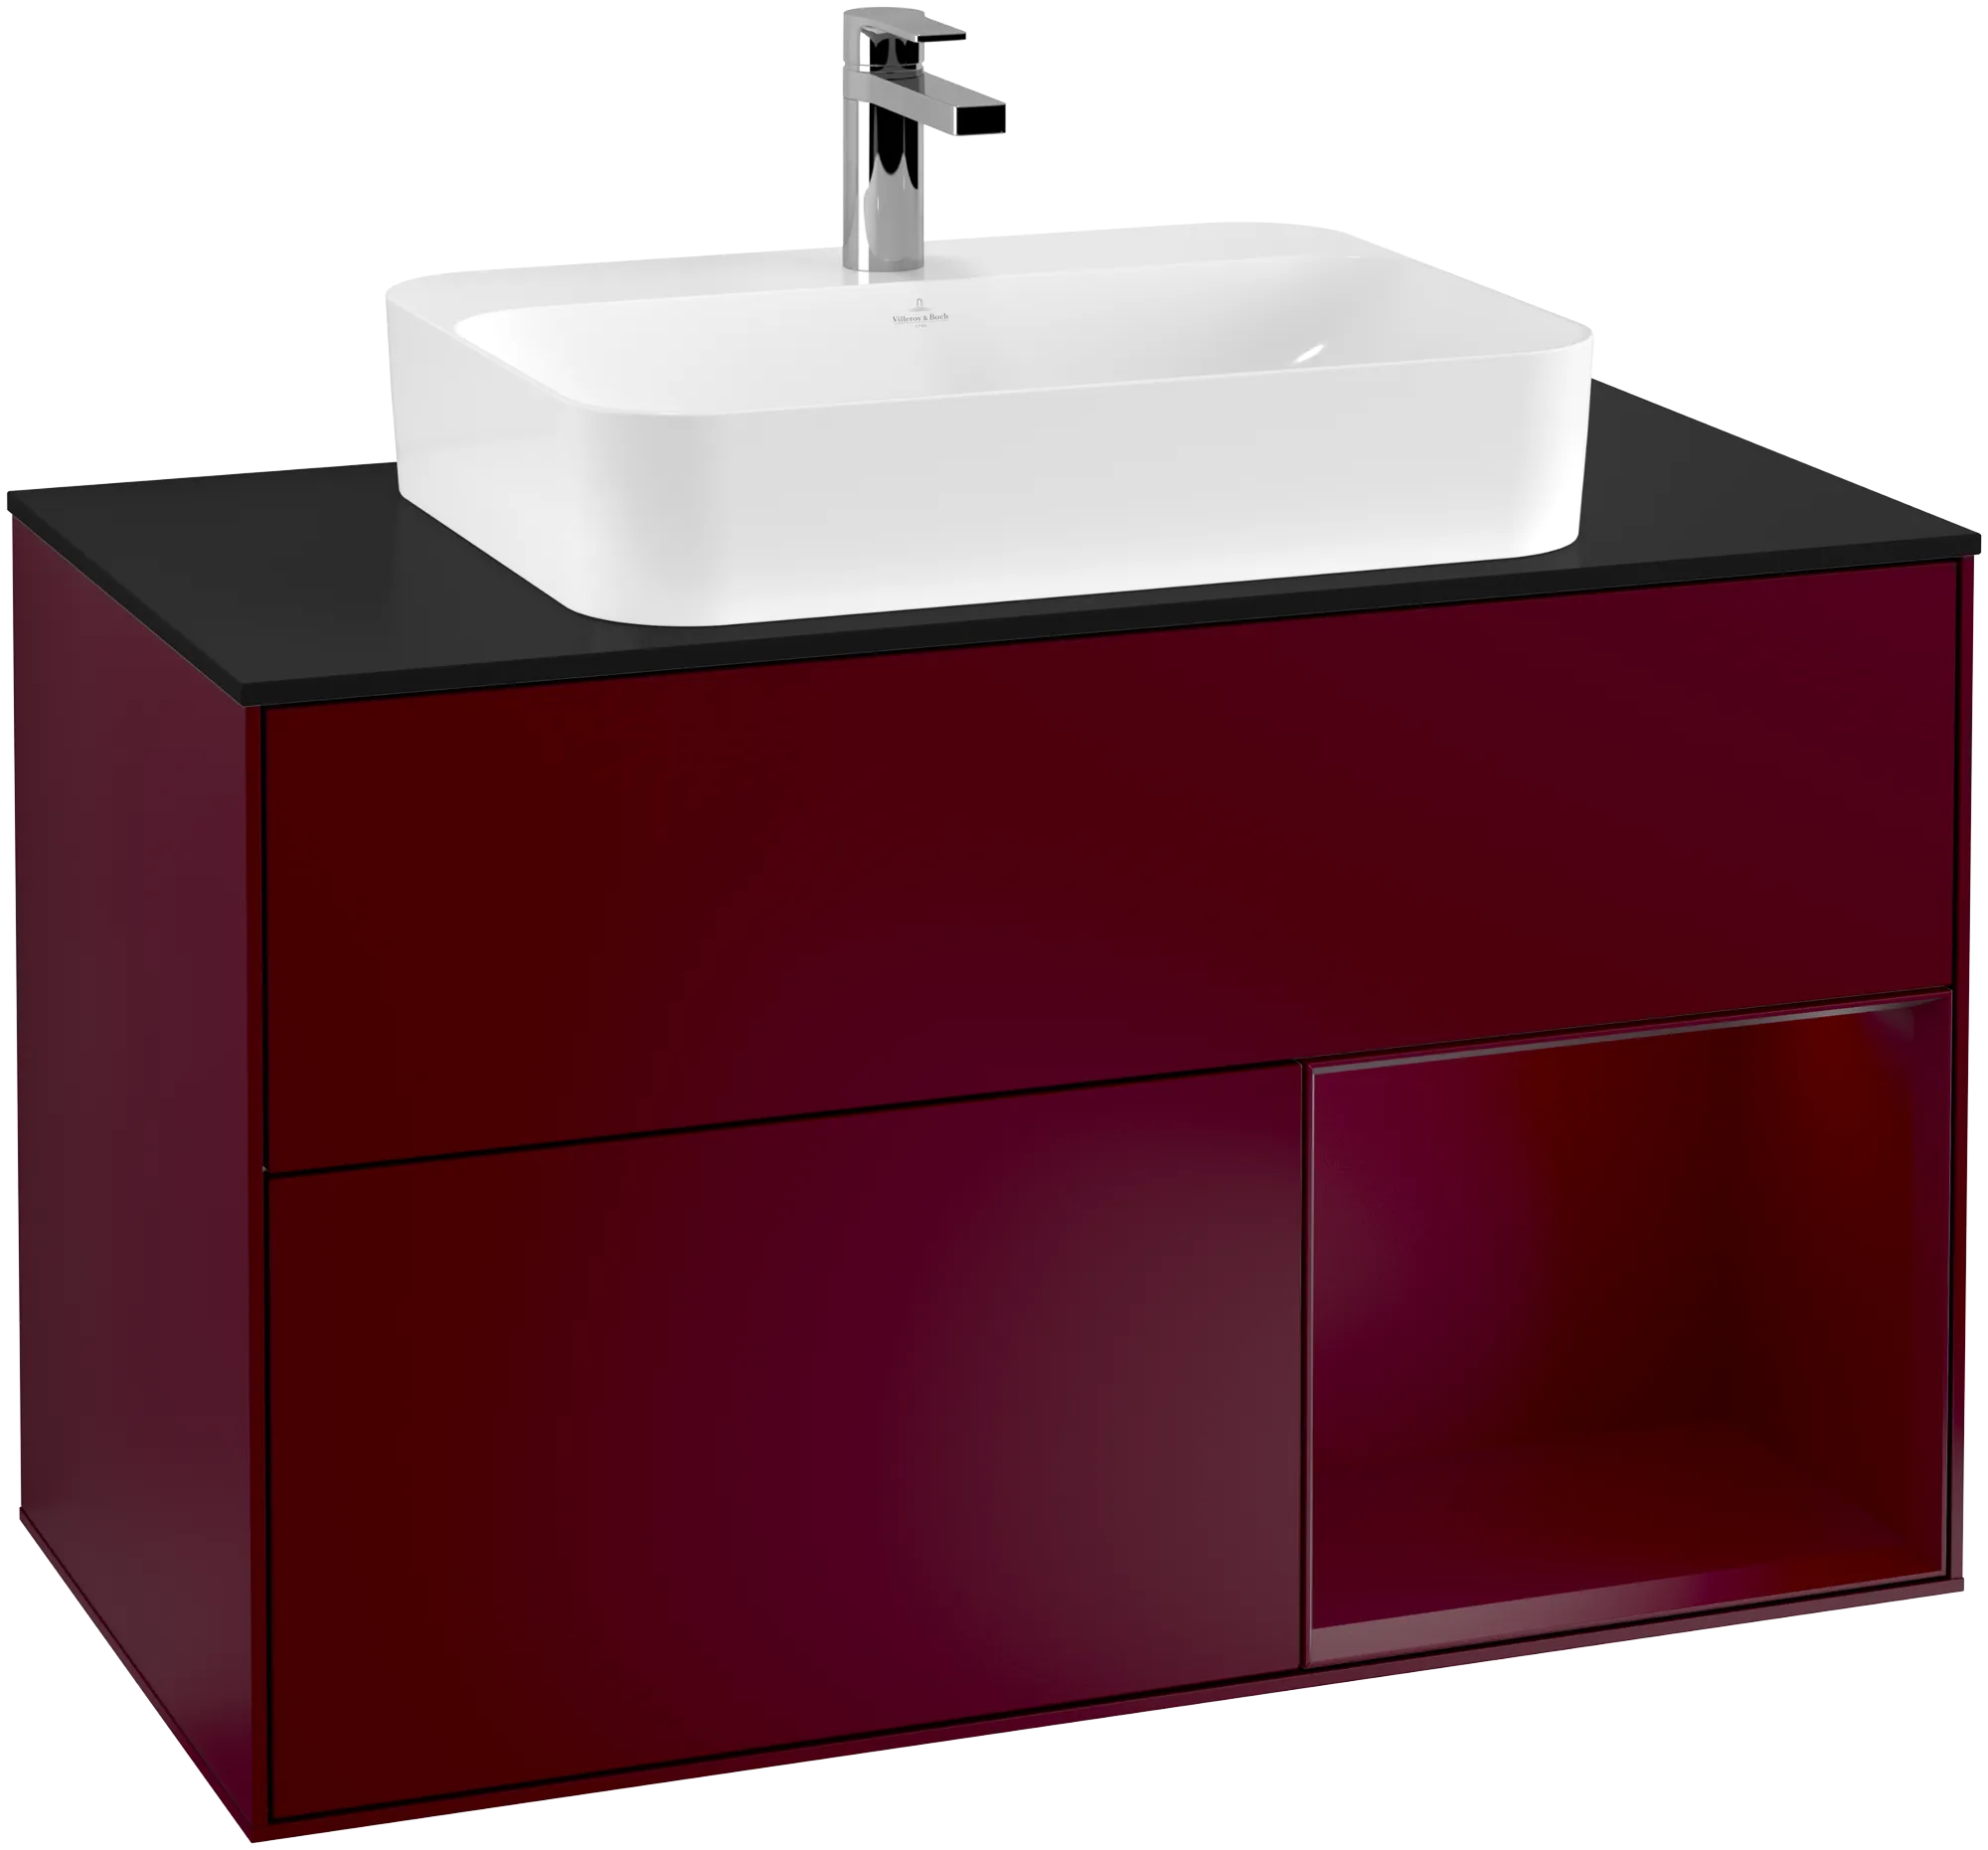 Obrázek VILLEROY BOCH Finion Vanity unit, with lighting, 2 pull-out compartments, 1000 x 603 x 501 mm, Peony Matt Lacquer / Peony Matt Lacquer / Glass Black Matt #G372HBHB